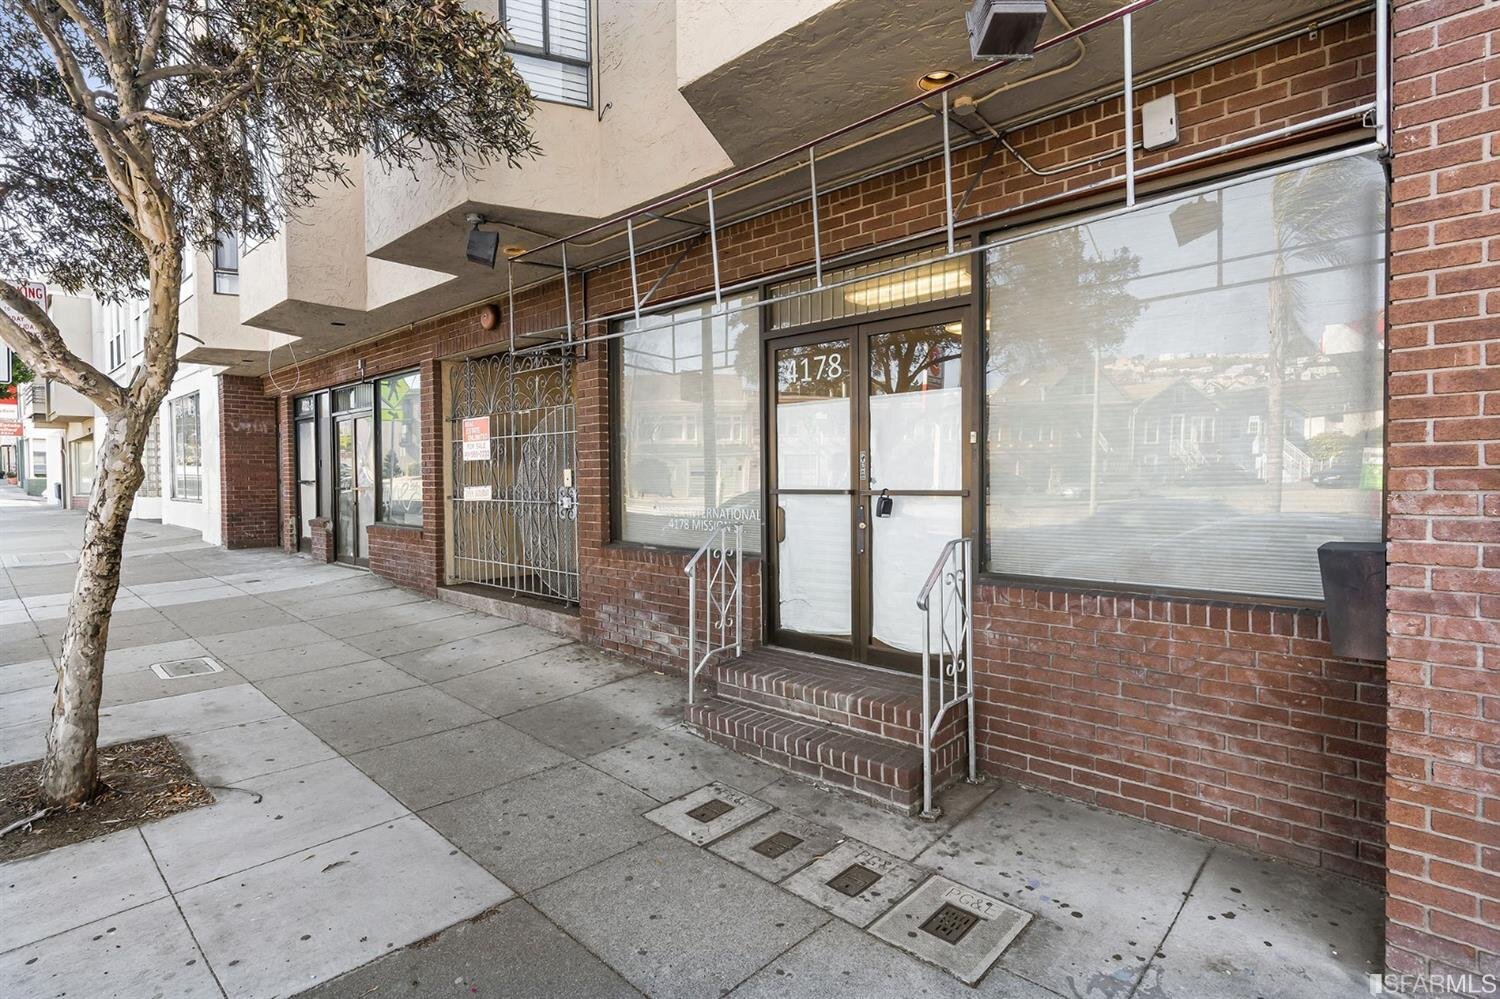 4180 Mission Street - commercial condo sale